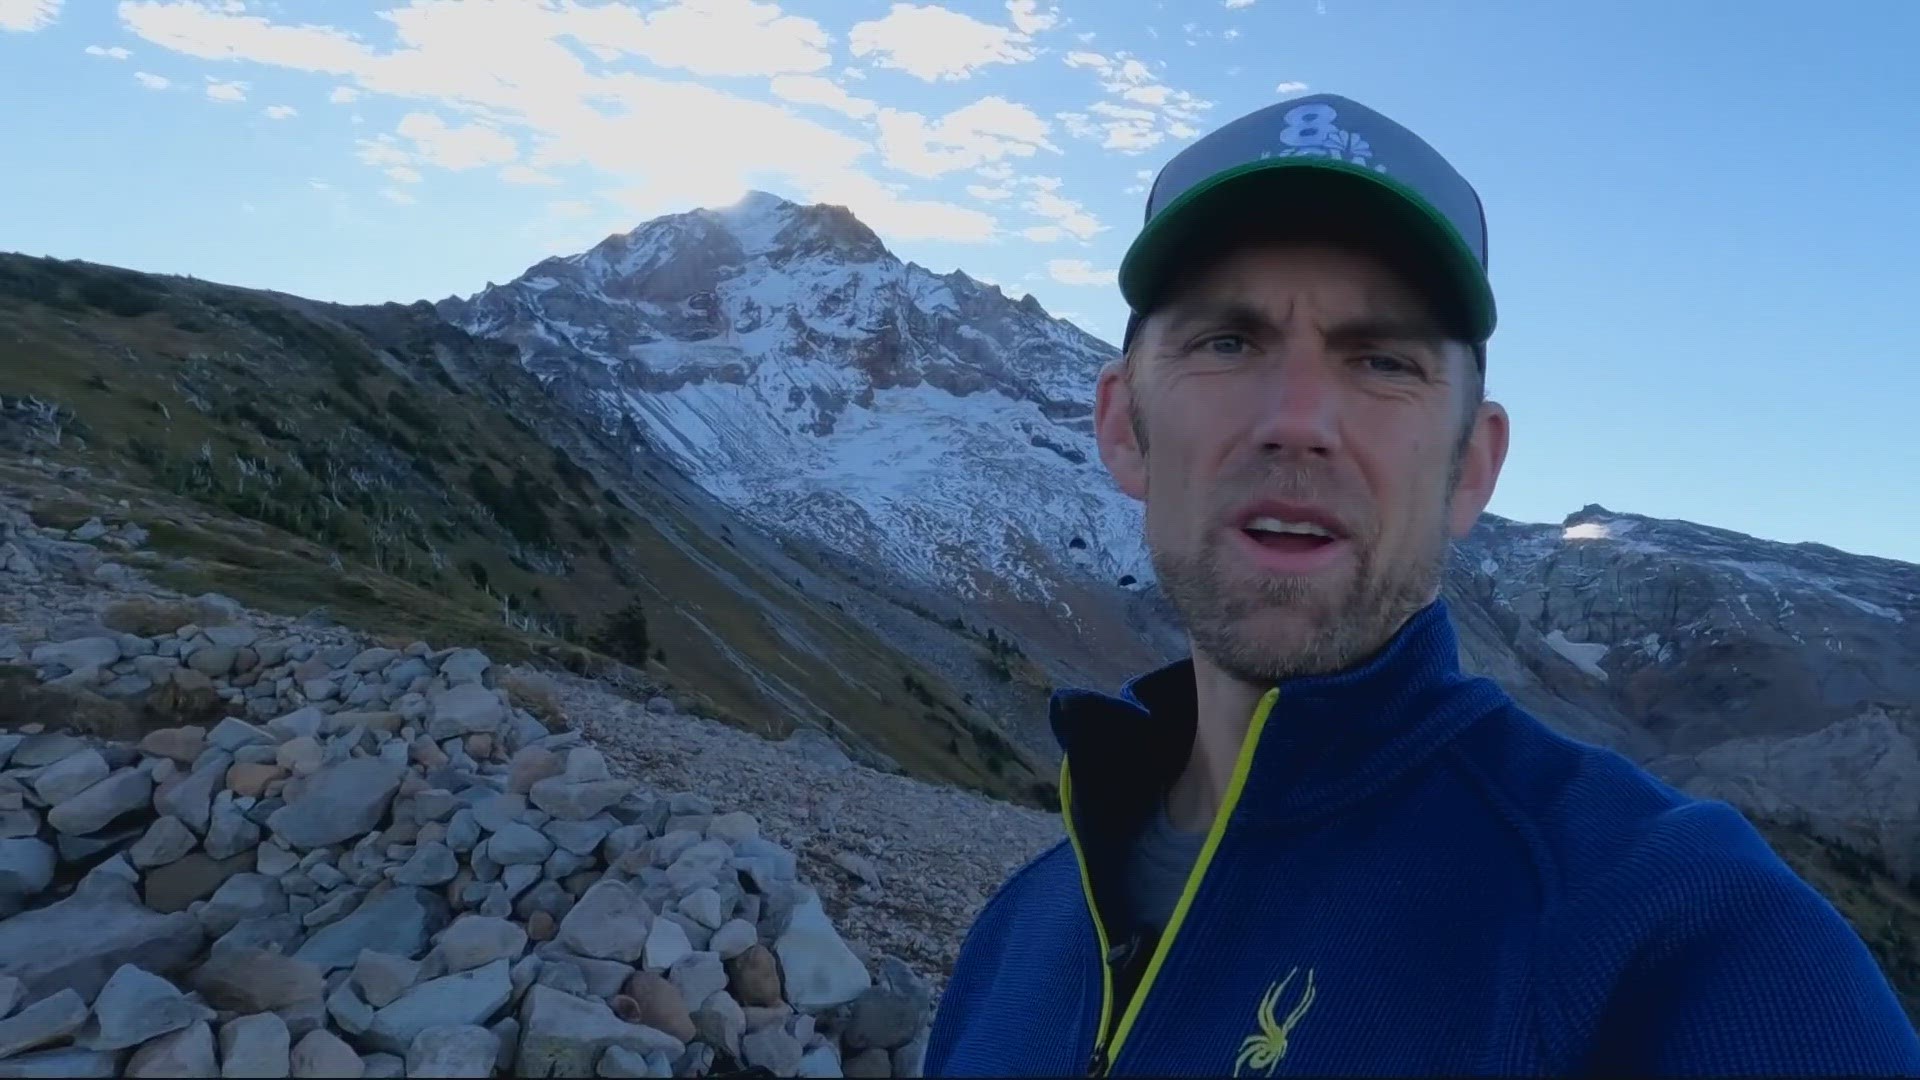 On Let's Get Out There, our host Jon Goodwin takes us on a journey exploring the beauty of the Top Spur Trailhead.